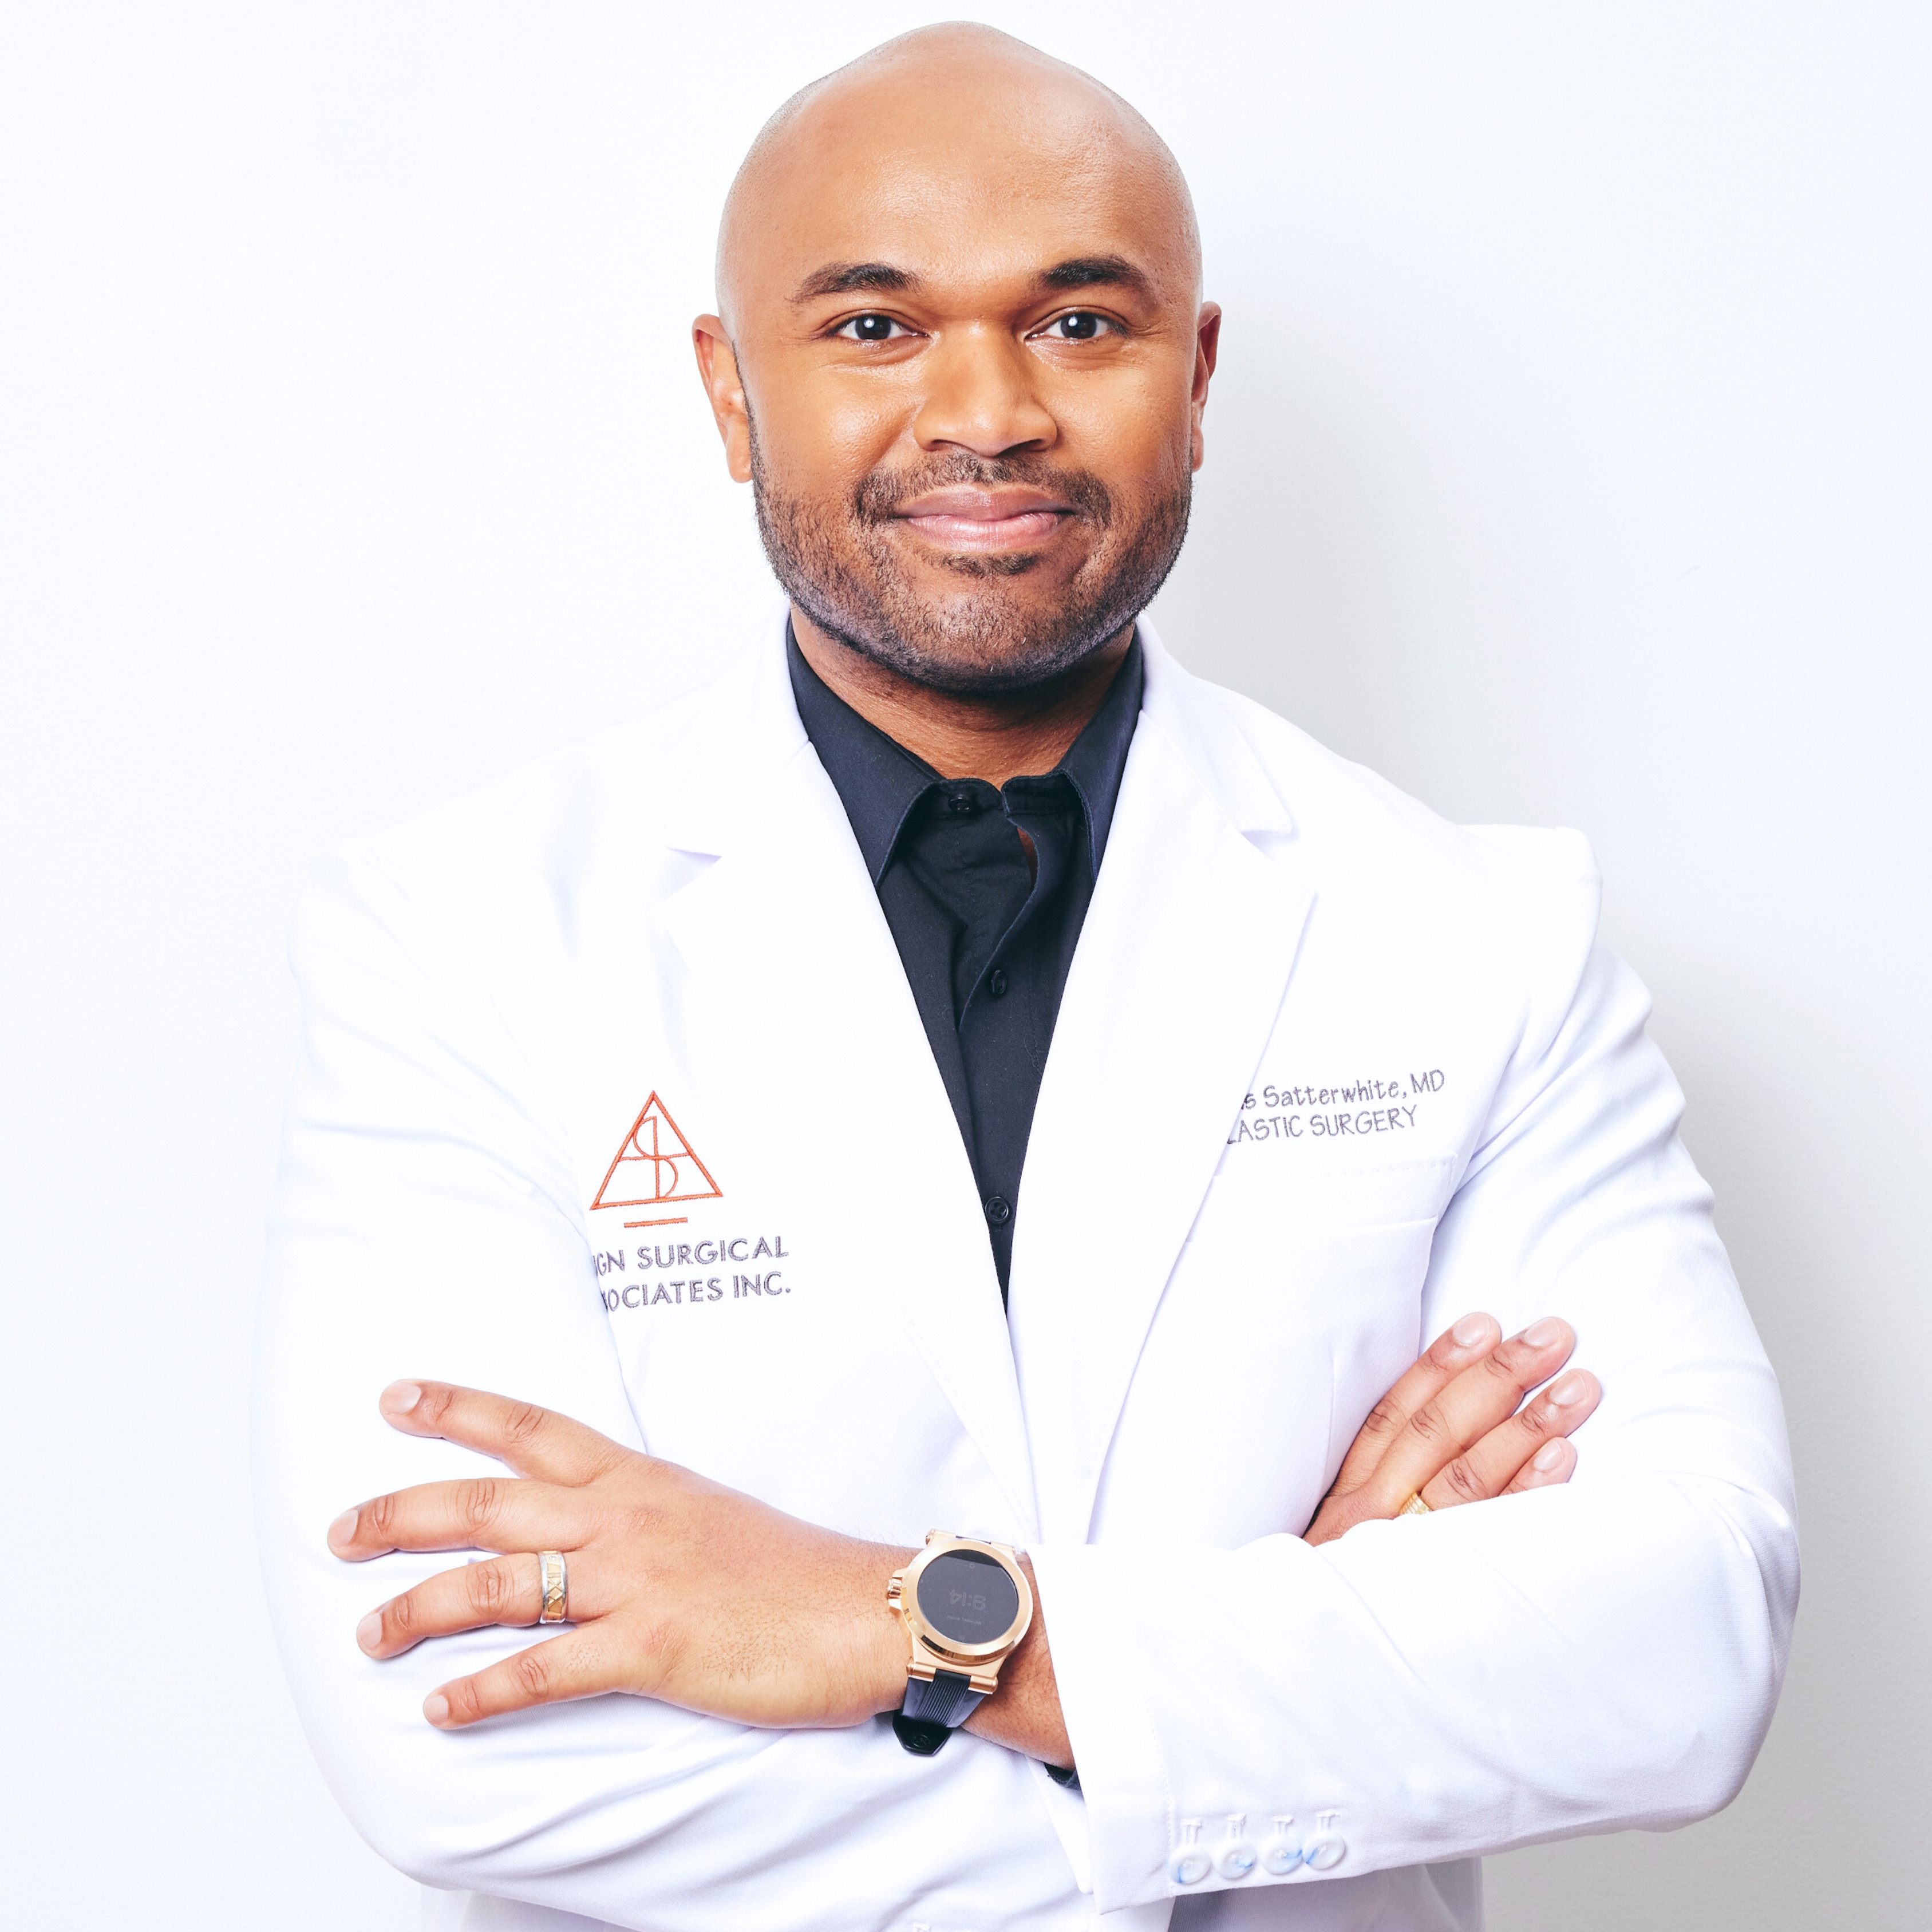 Dr. Thomas Satterwhite, founder and CEO of Align Surgical Associates Inc.